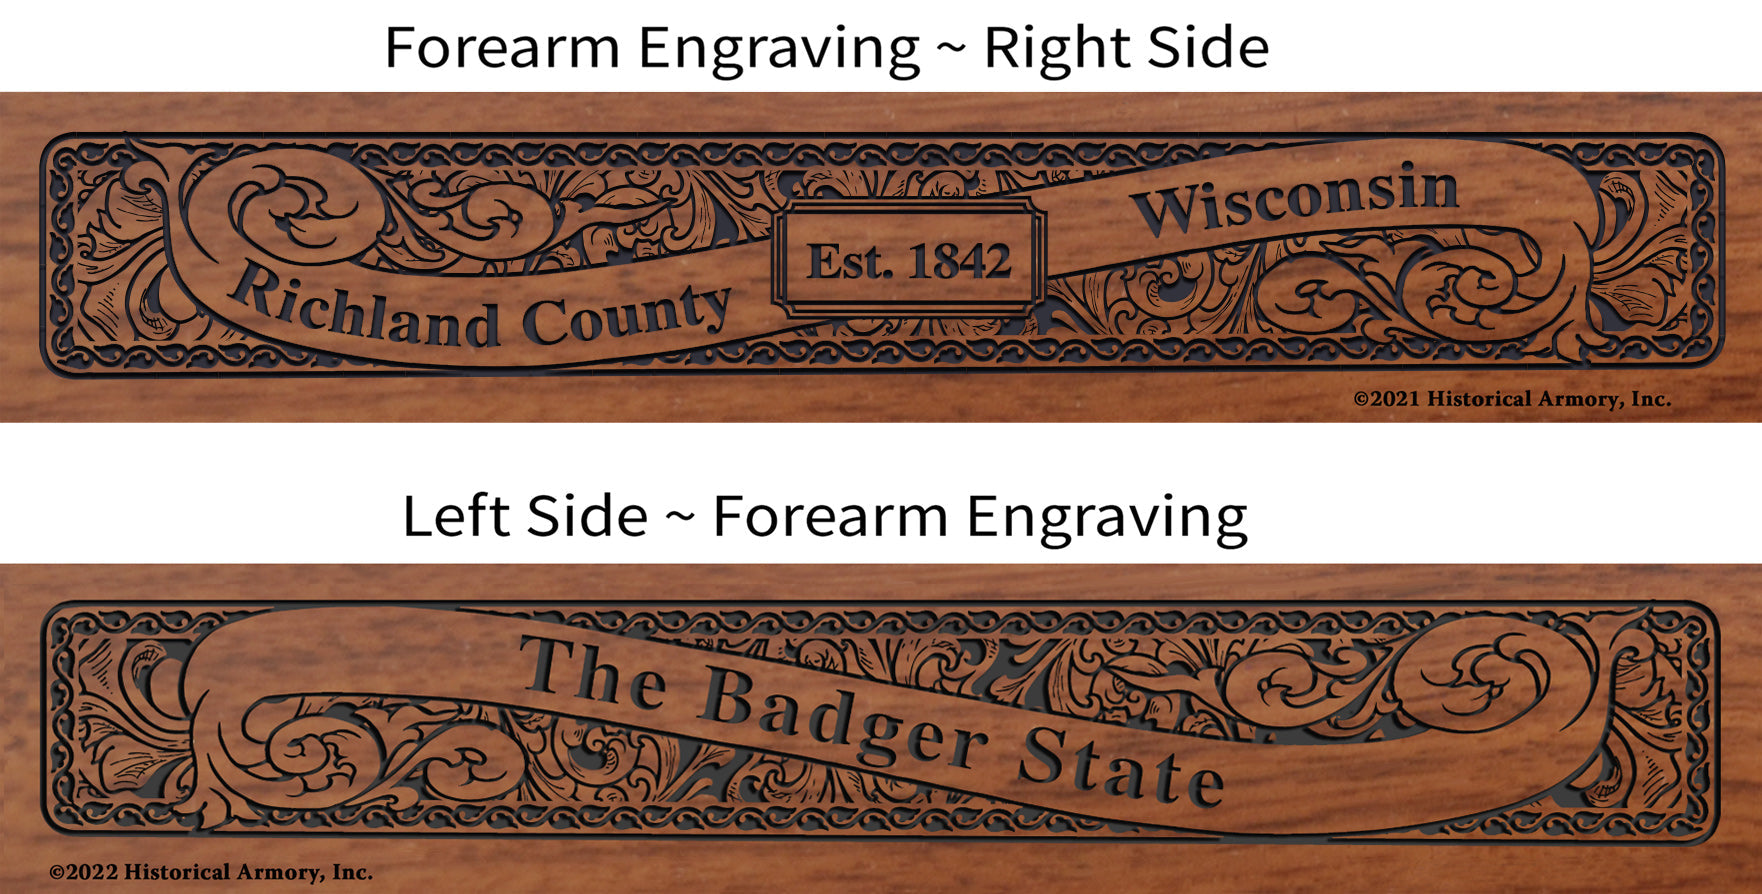 Richland County Wisconsin Engraved Rifle Forearm